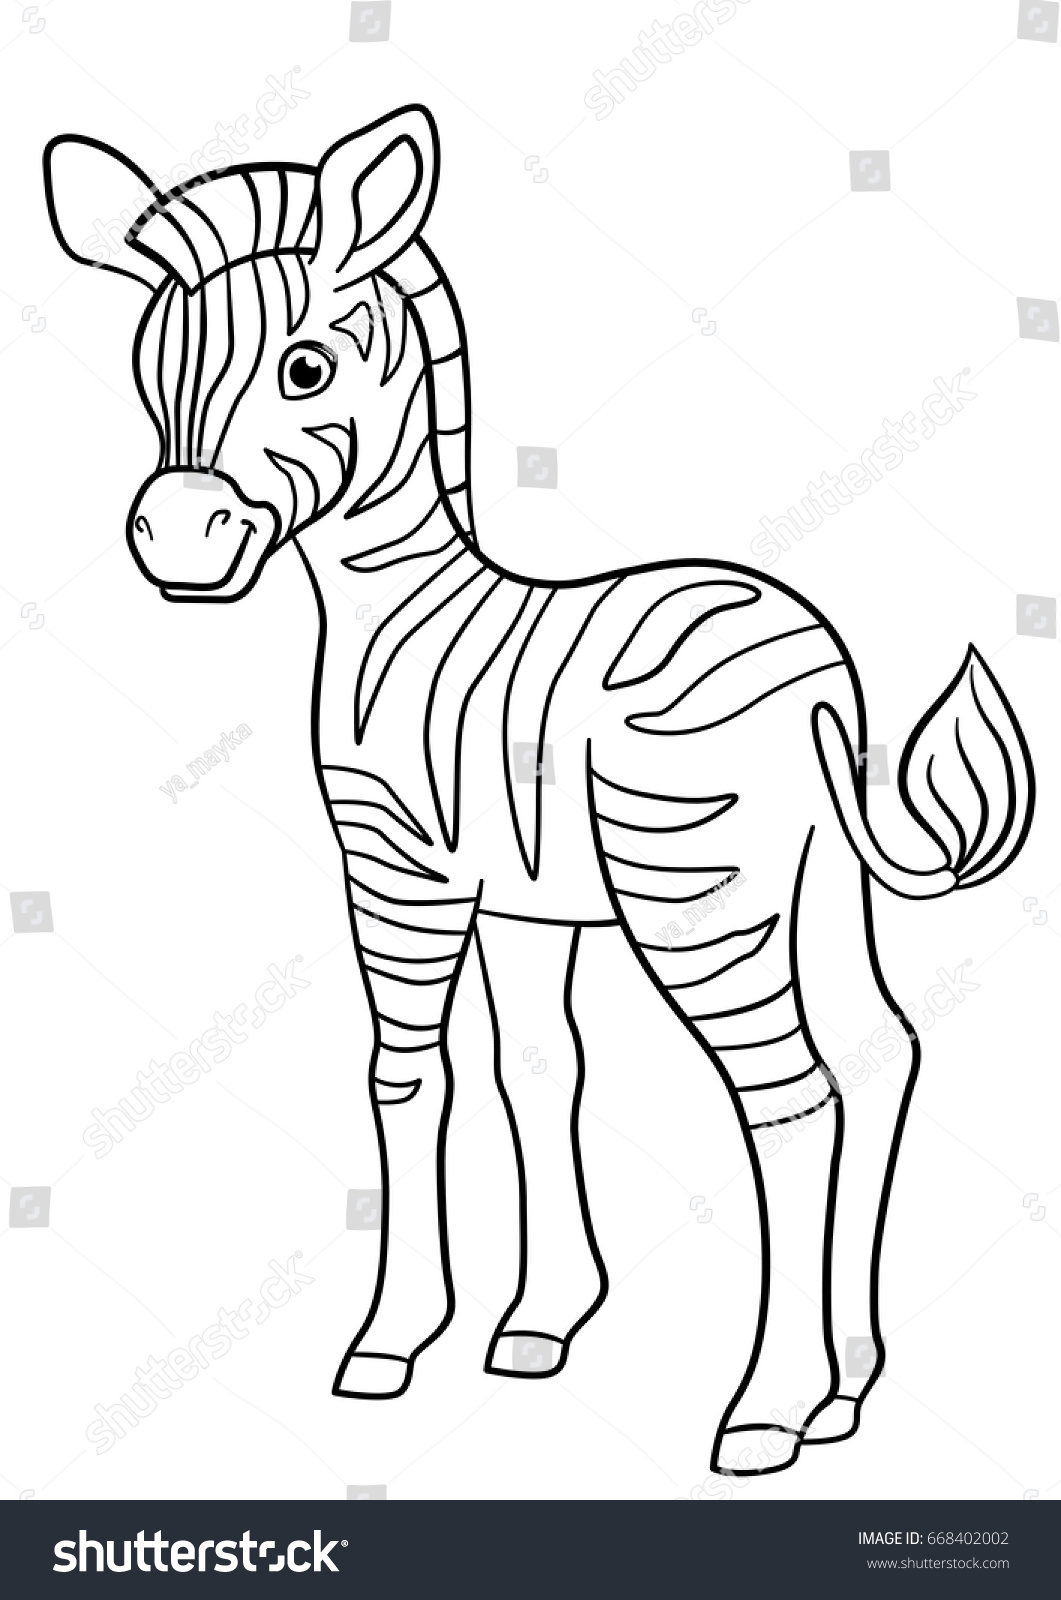 Coloring pages Little cute baby zebra stands and smiles